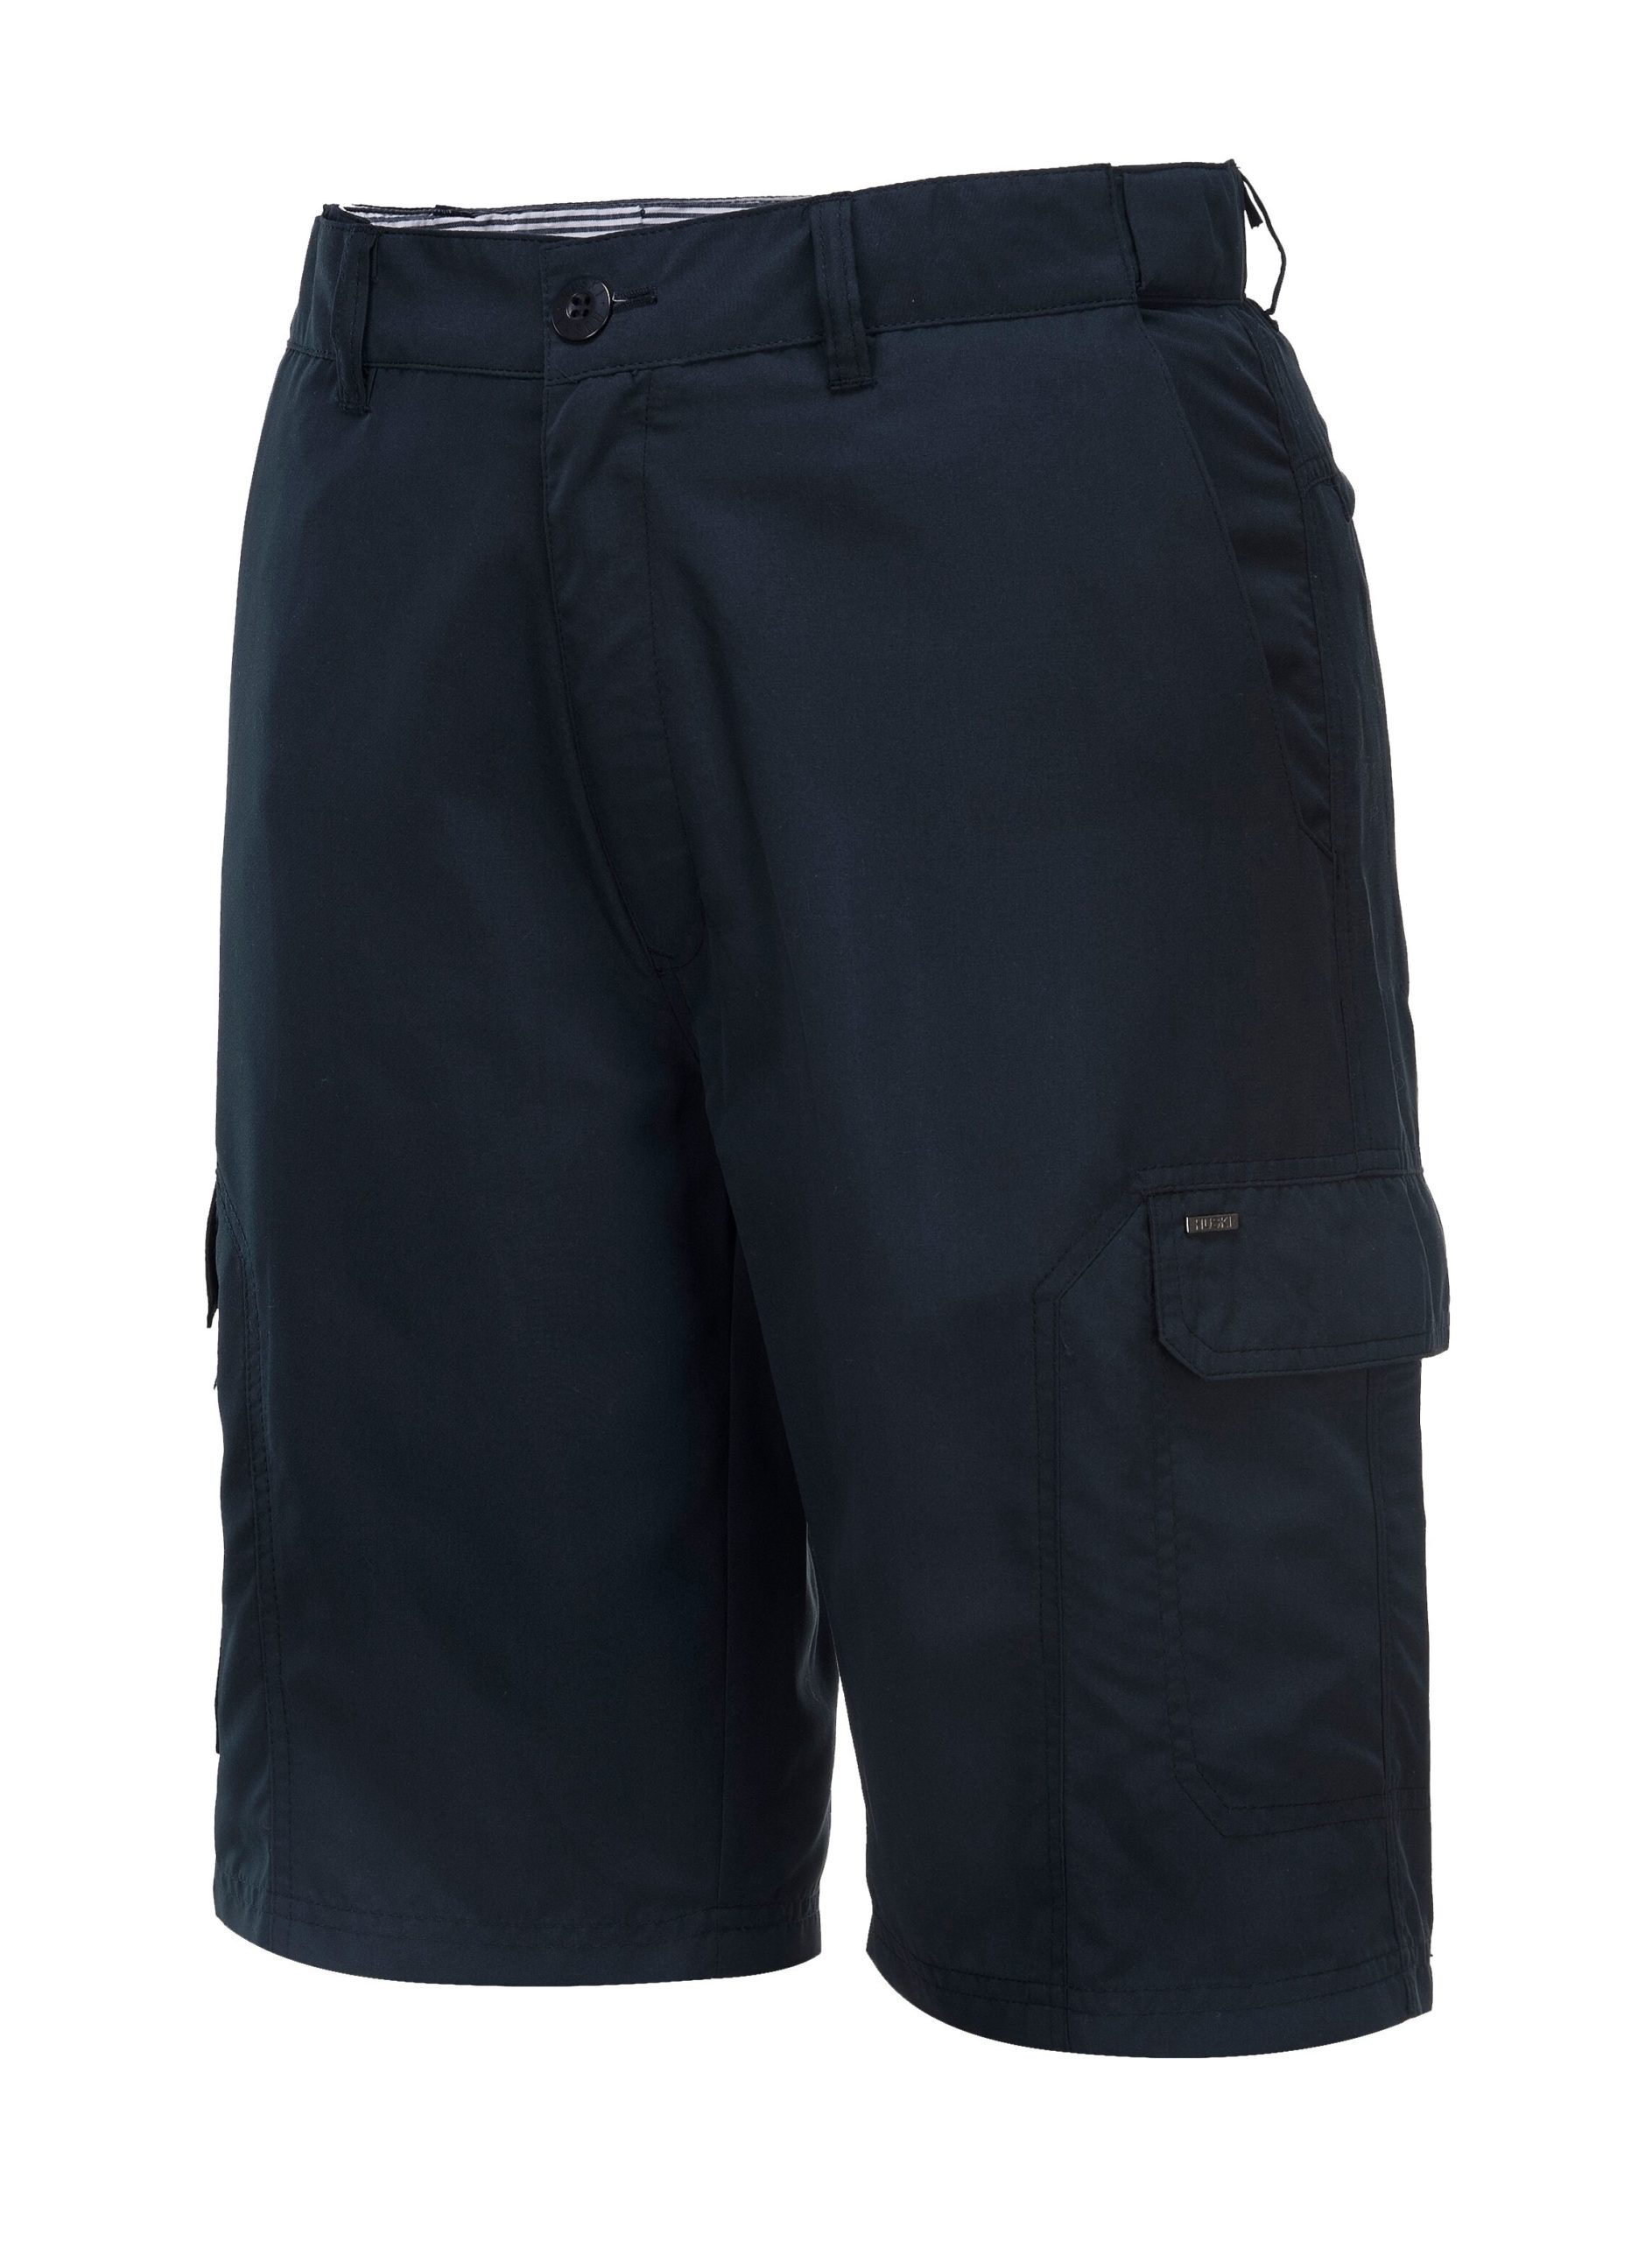 Mens Shorts, Twin-stitched seams for extra durability